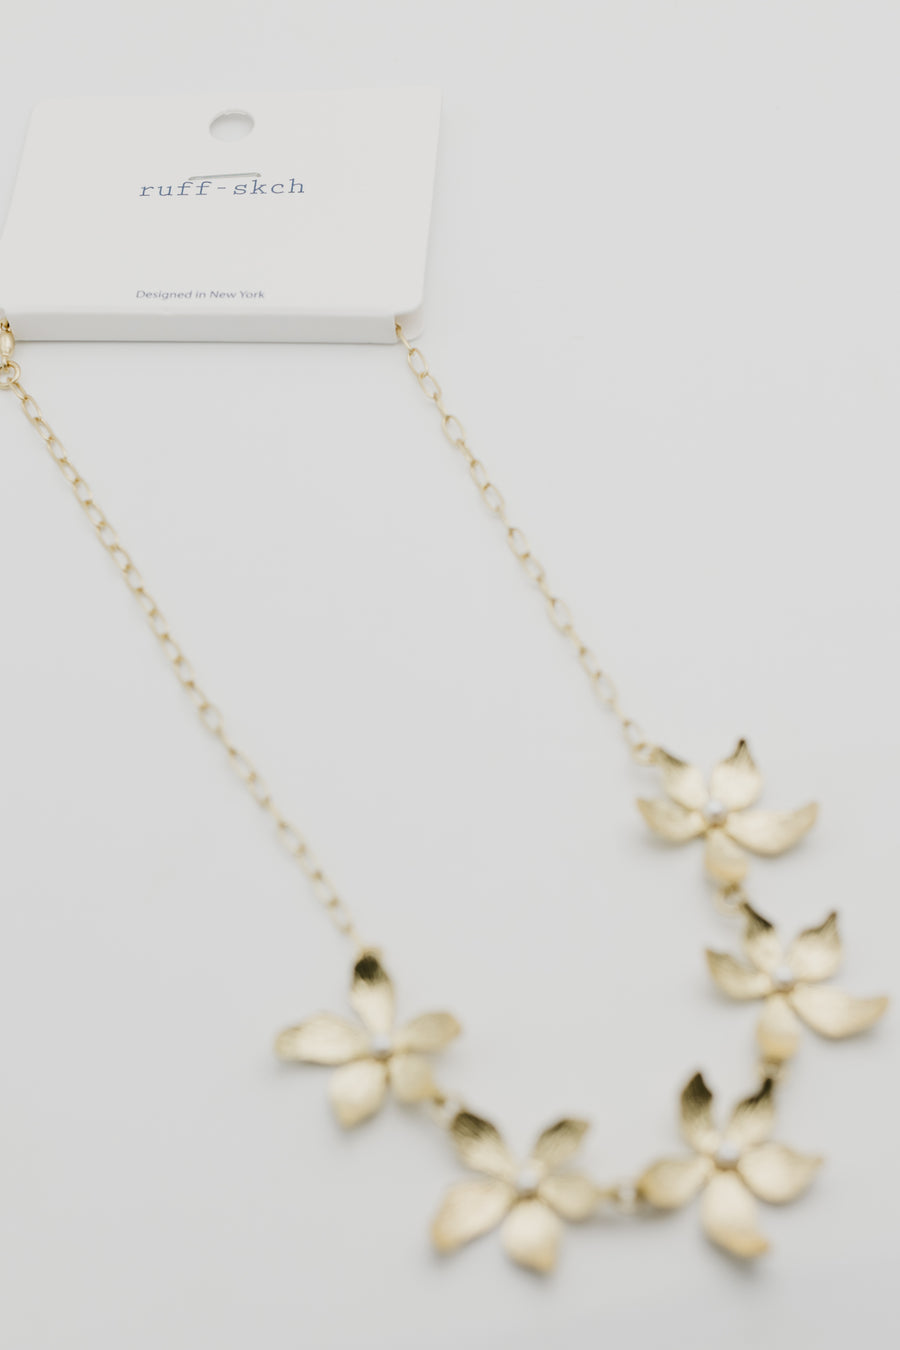 The Greyson Flower Necklace